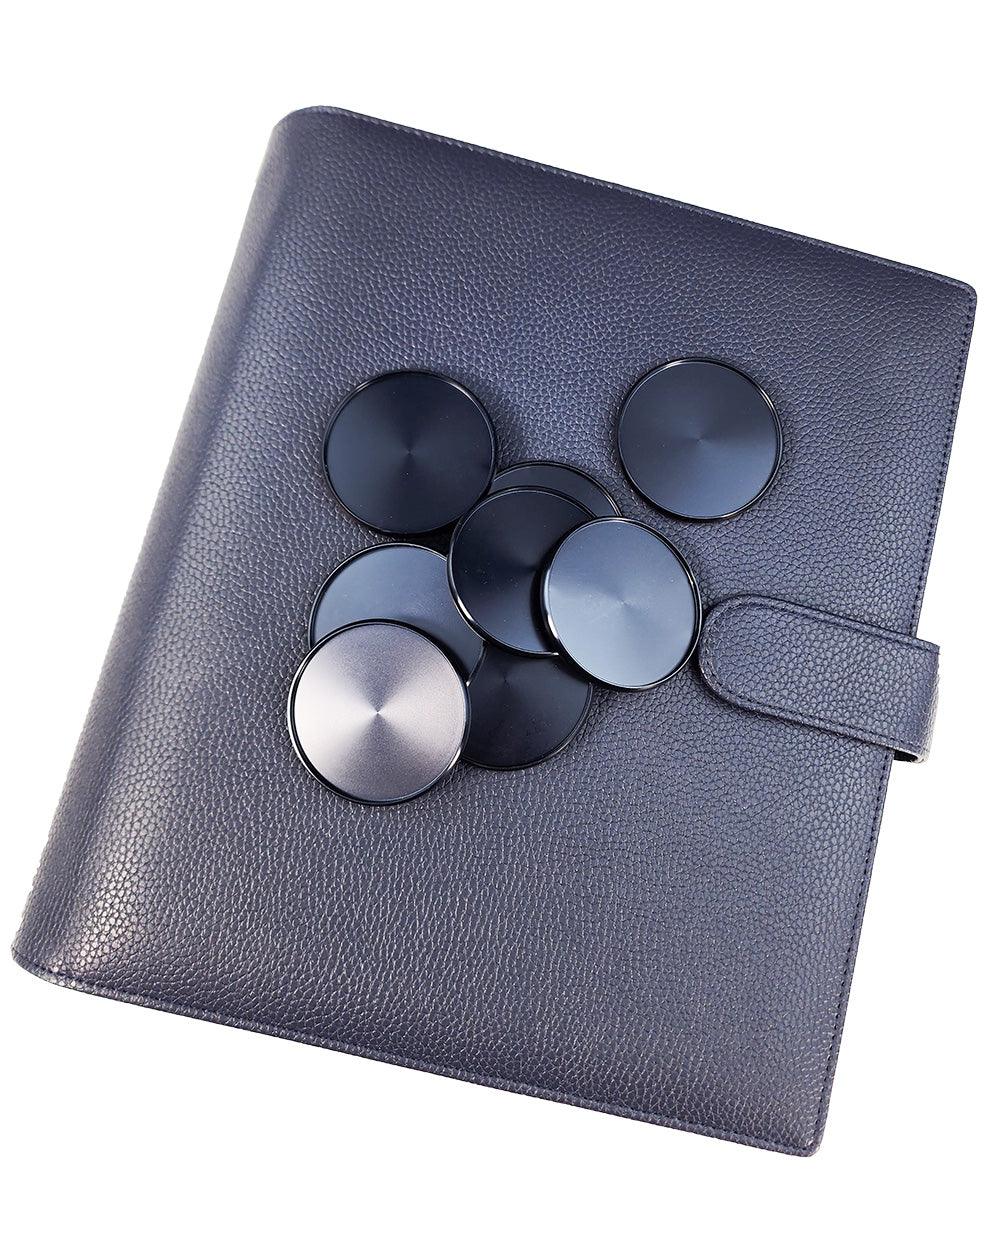 Midnight blue metal discs for discbound planners and disc notebooks by Jane's Agenda.